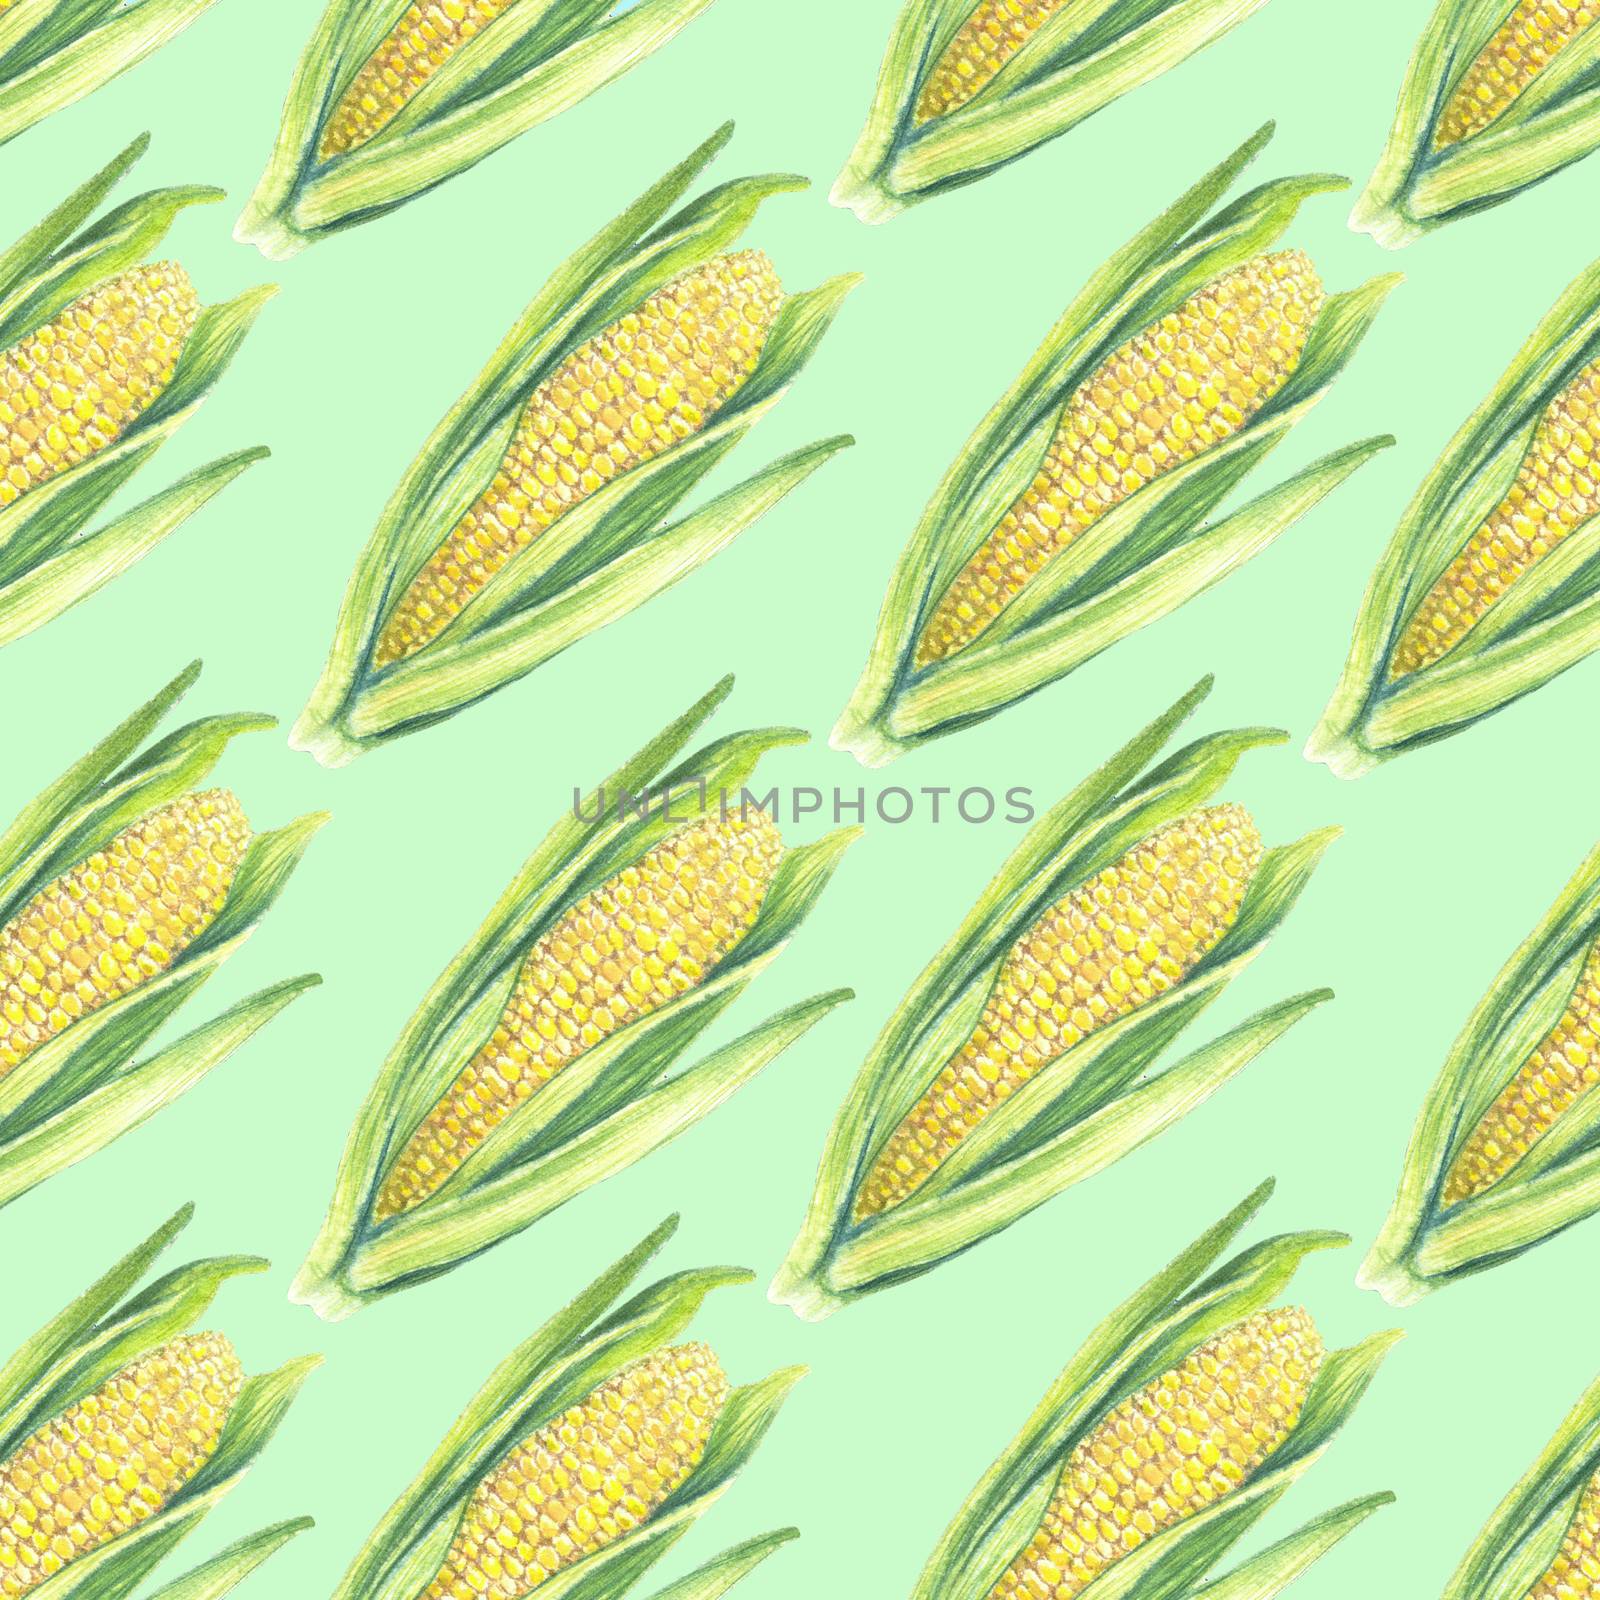 Seamless Pattern of corn cobs with leaves on green background. Eco vegetables plants. Shop design, healthy lifestyle, packaging, textile. Hand drawn watercolour illustration. Botanical realistic art. by sshisshka